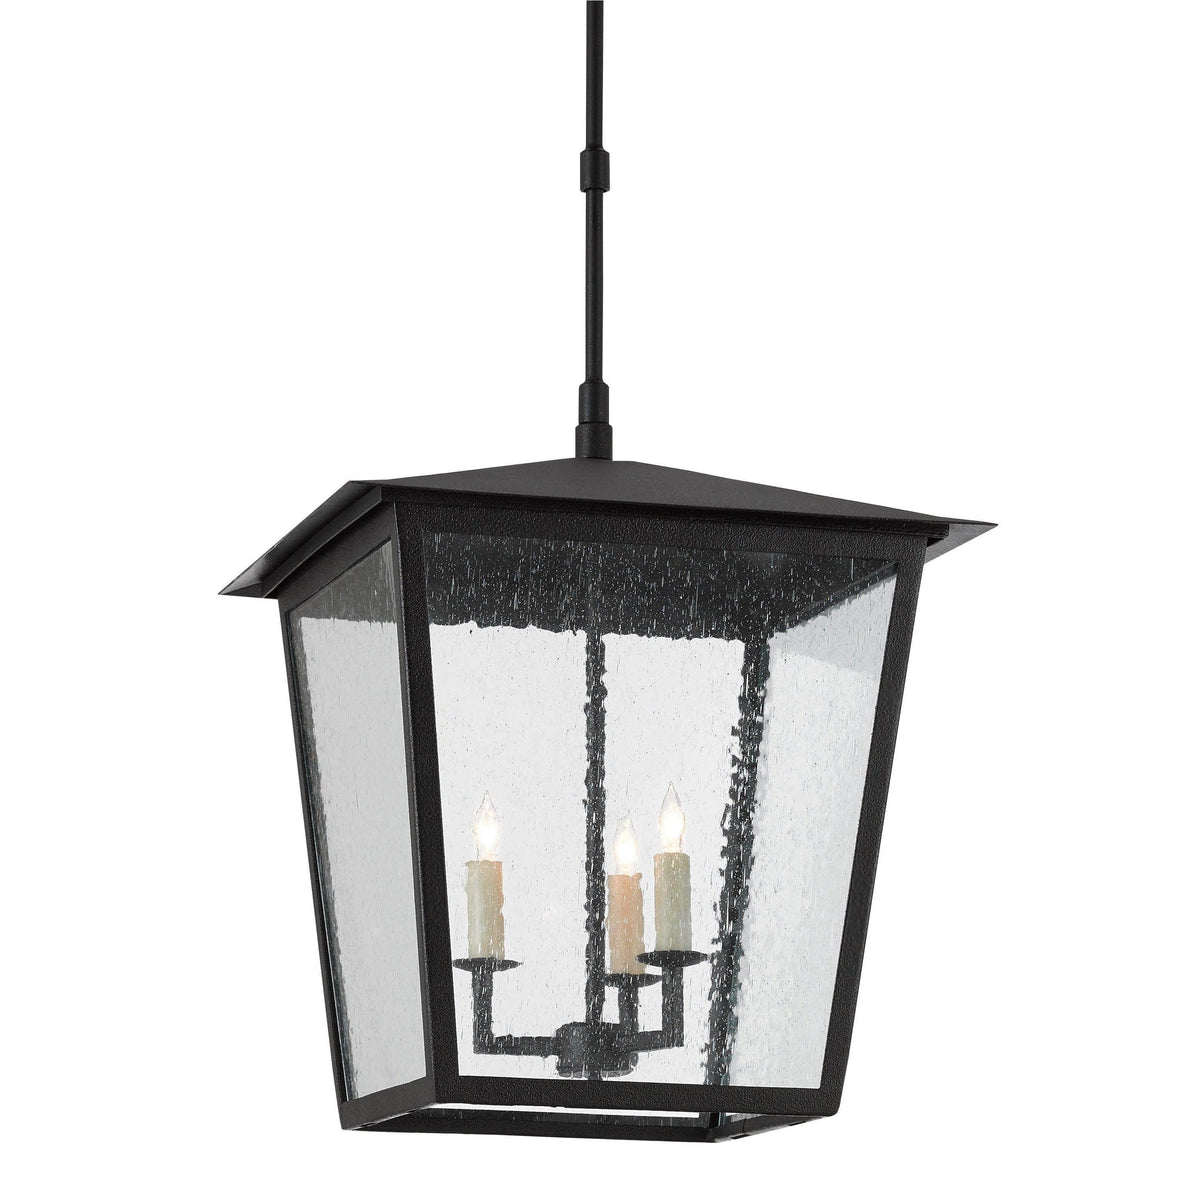 Currey and Company - Bening Outdoor Lantern - 9500-0002 | Montreal Lighting & Hardware